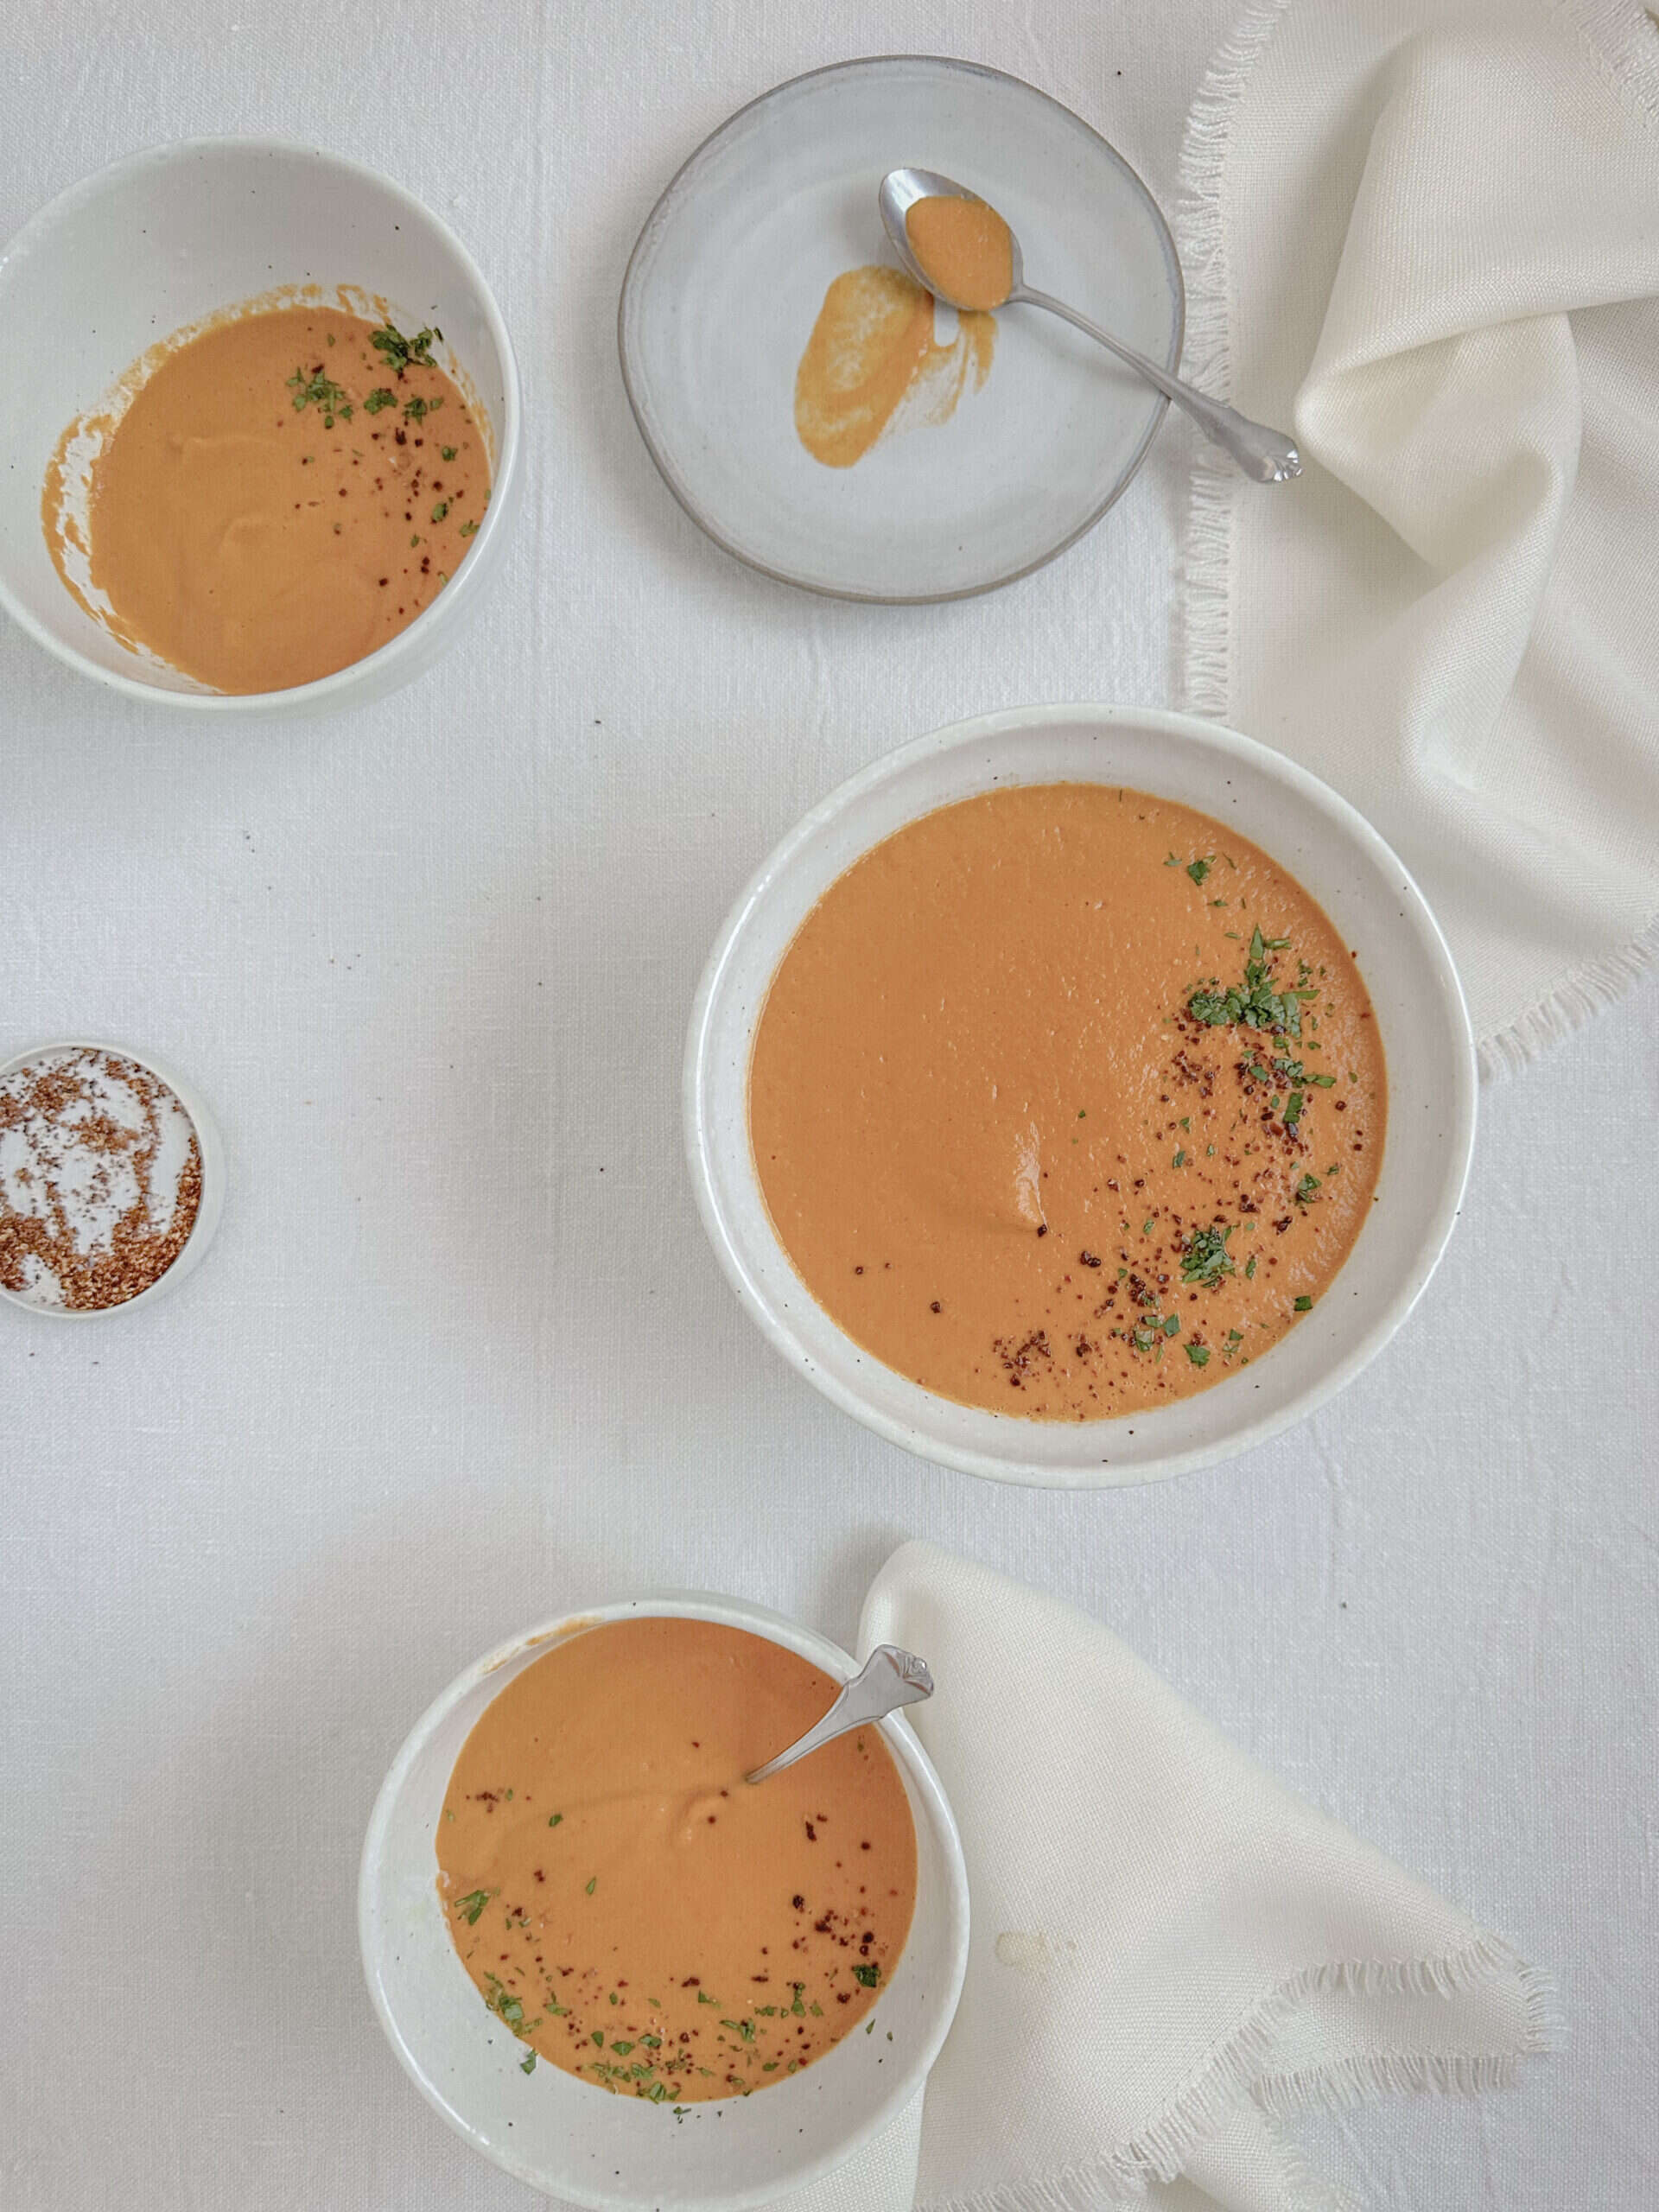 tomato soup in soup bowls on the table with a white tablecloth